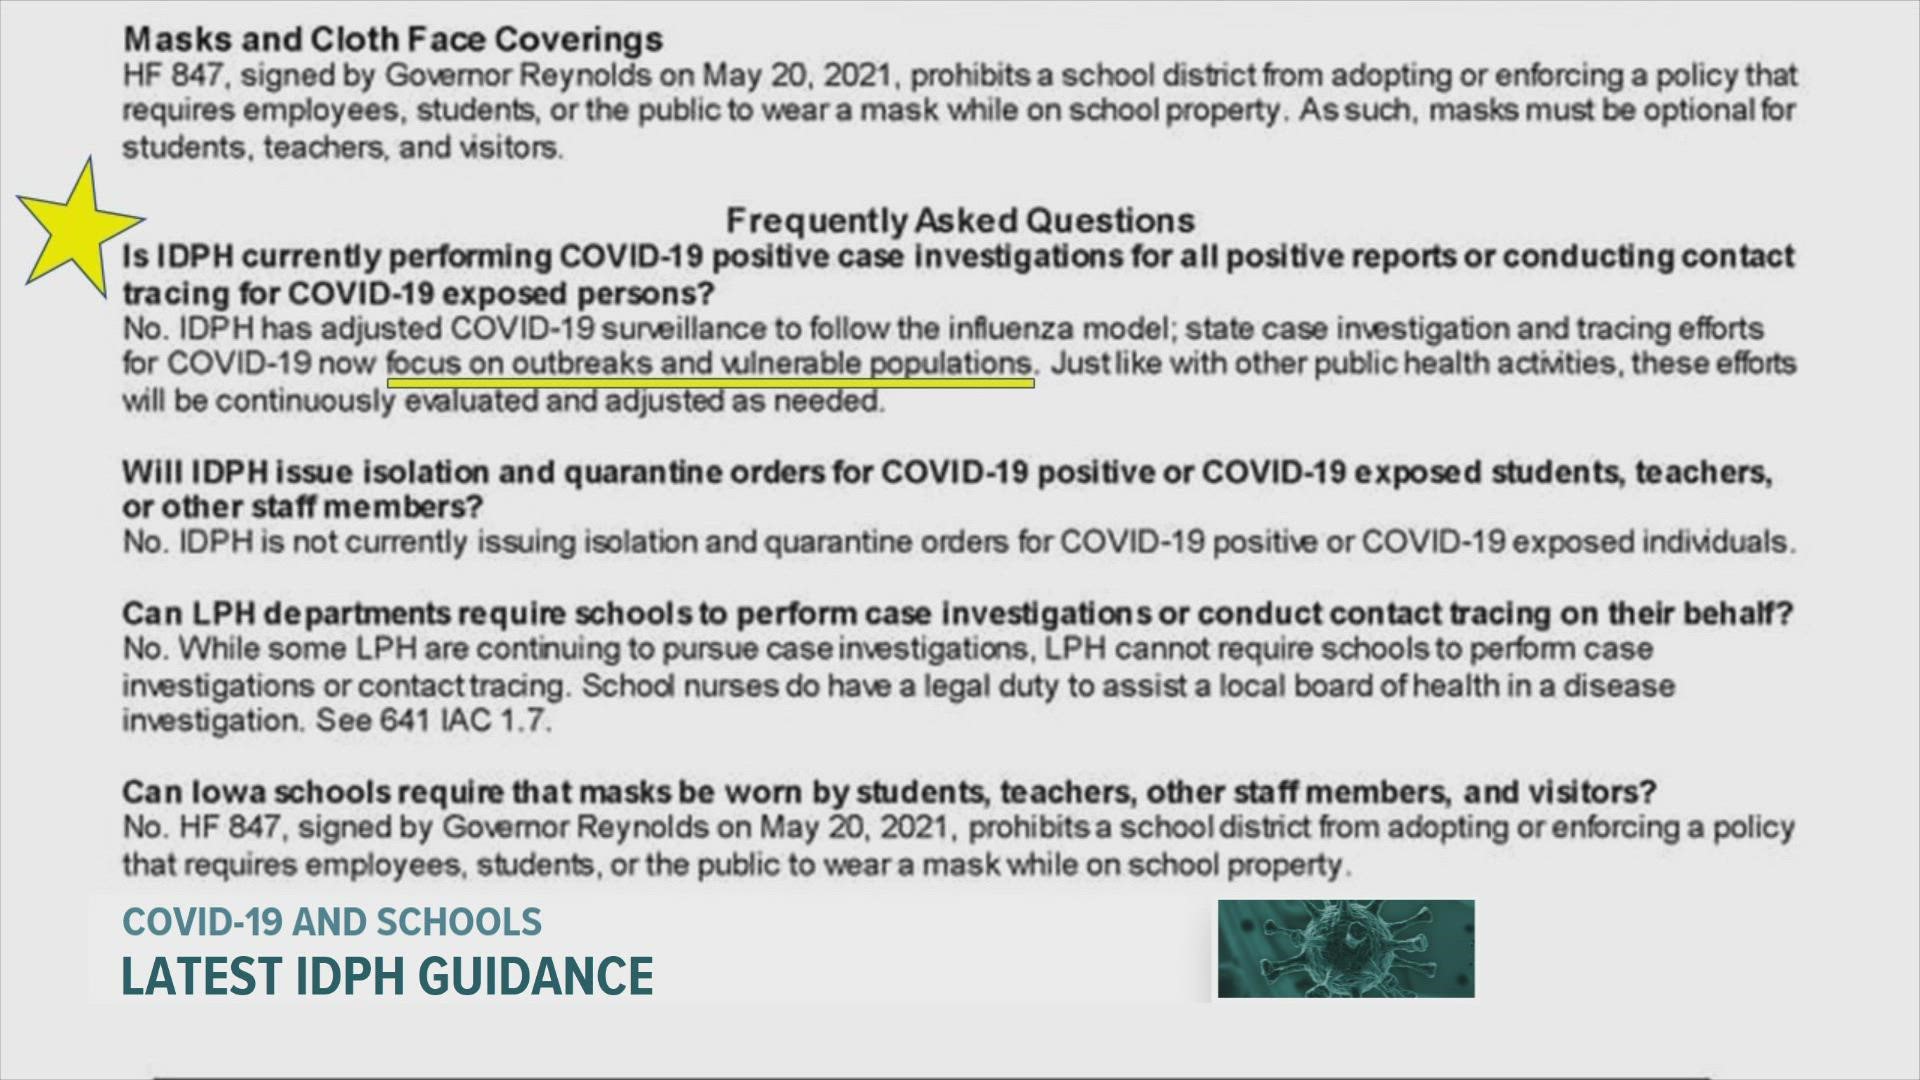 New documents given to county public health and school leaders show the latest guidance for coronavirus.